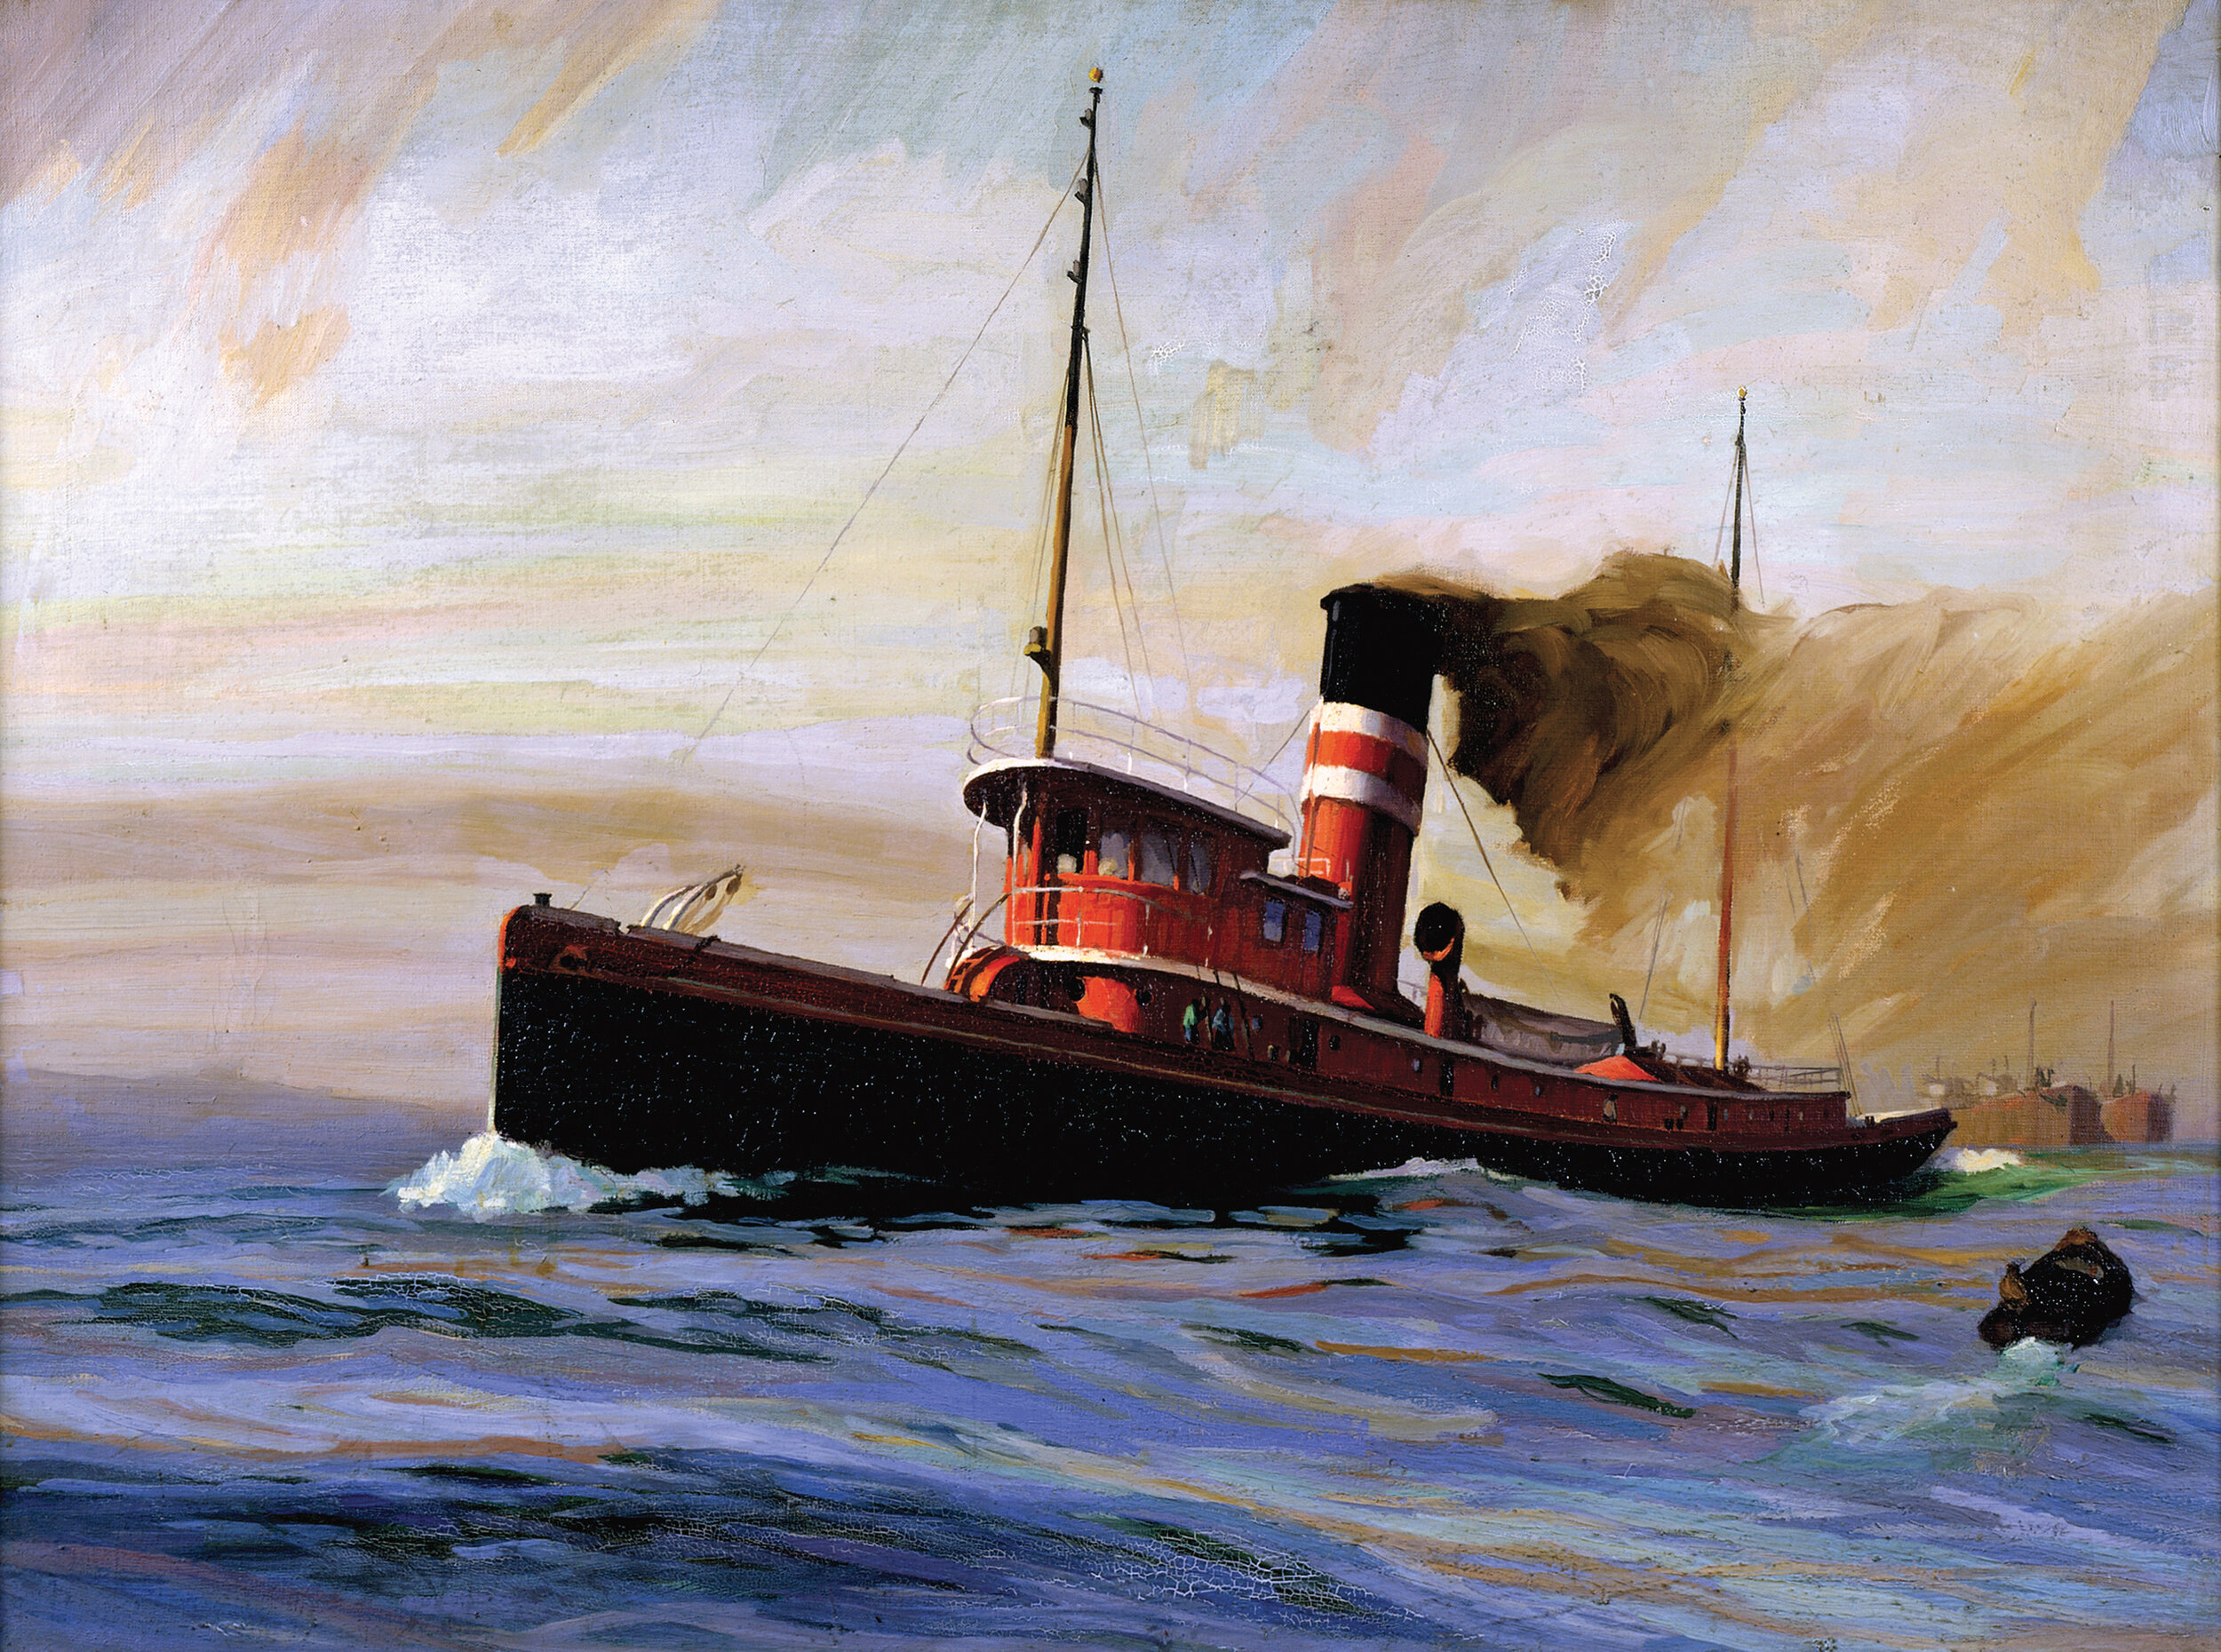  John A. Noble (1913-1983)   Kaleen   Reproduction of the original oil painting, c. 1947,  15 ¼” x 19 ¼”   Gift of McAllister Towing &amp; Transportation   